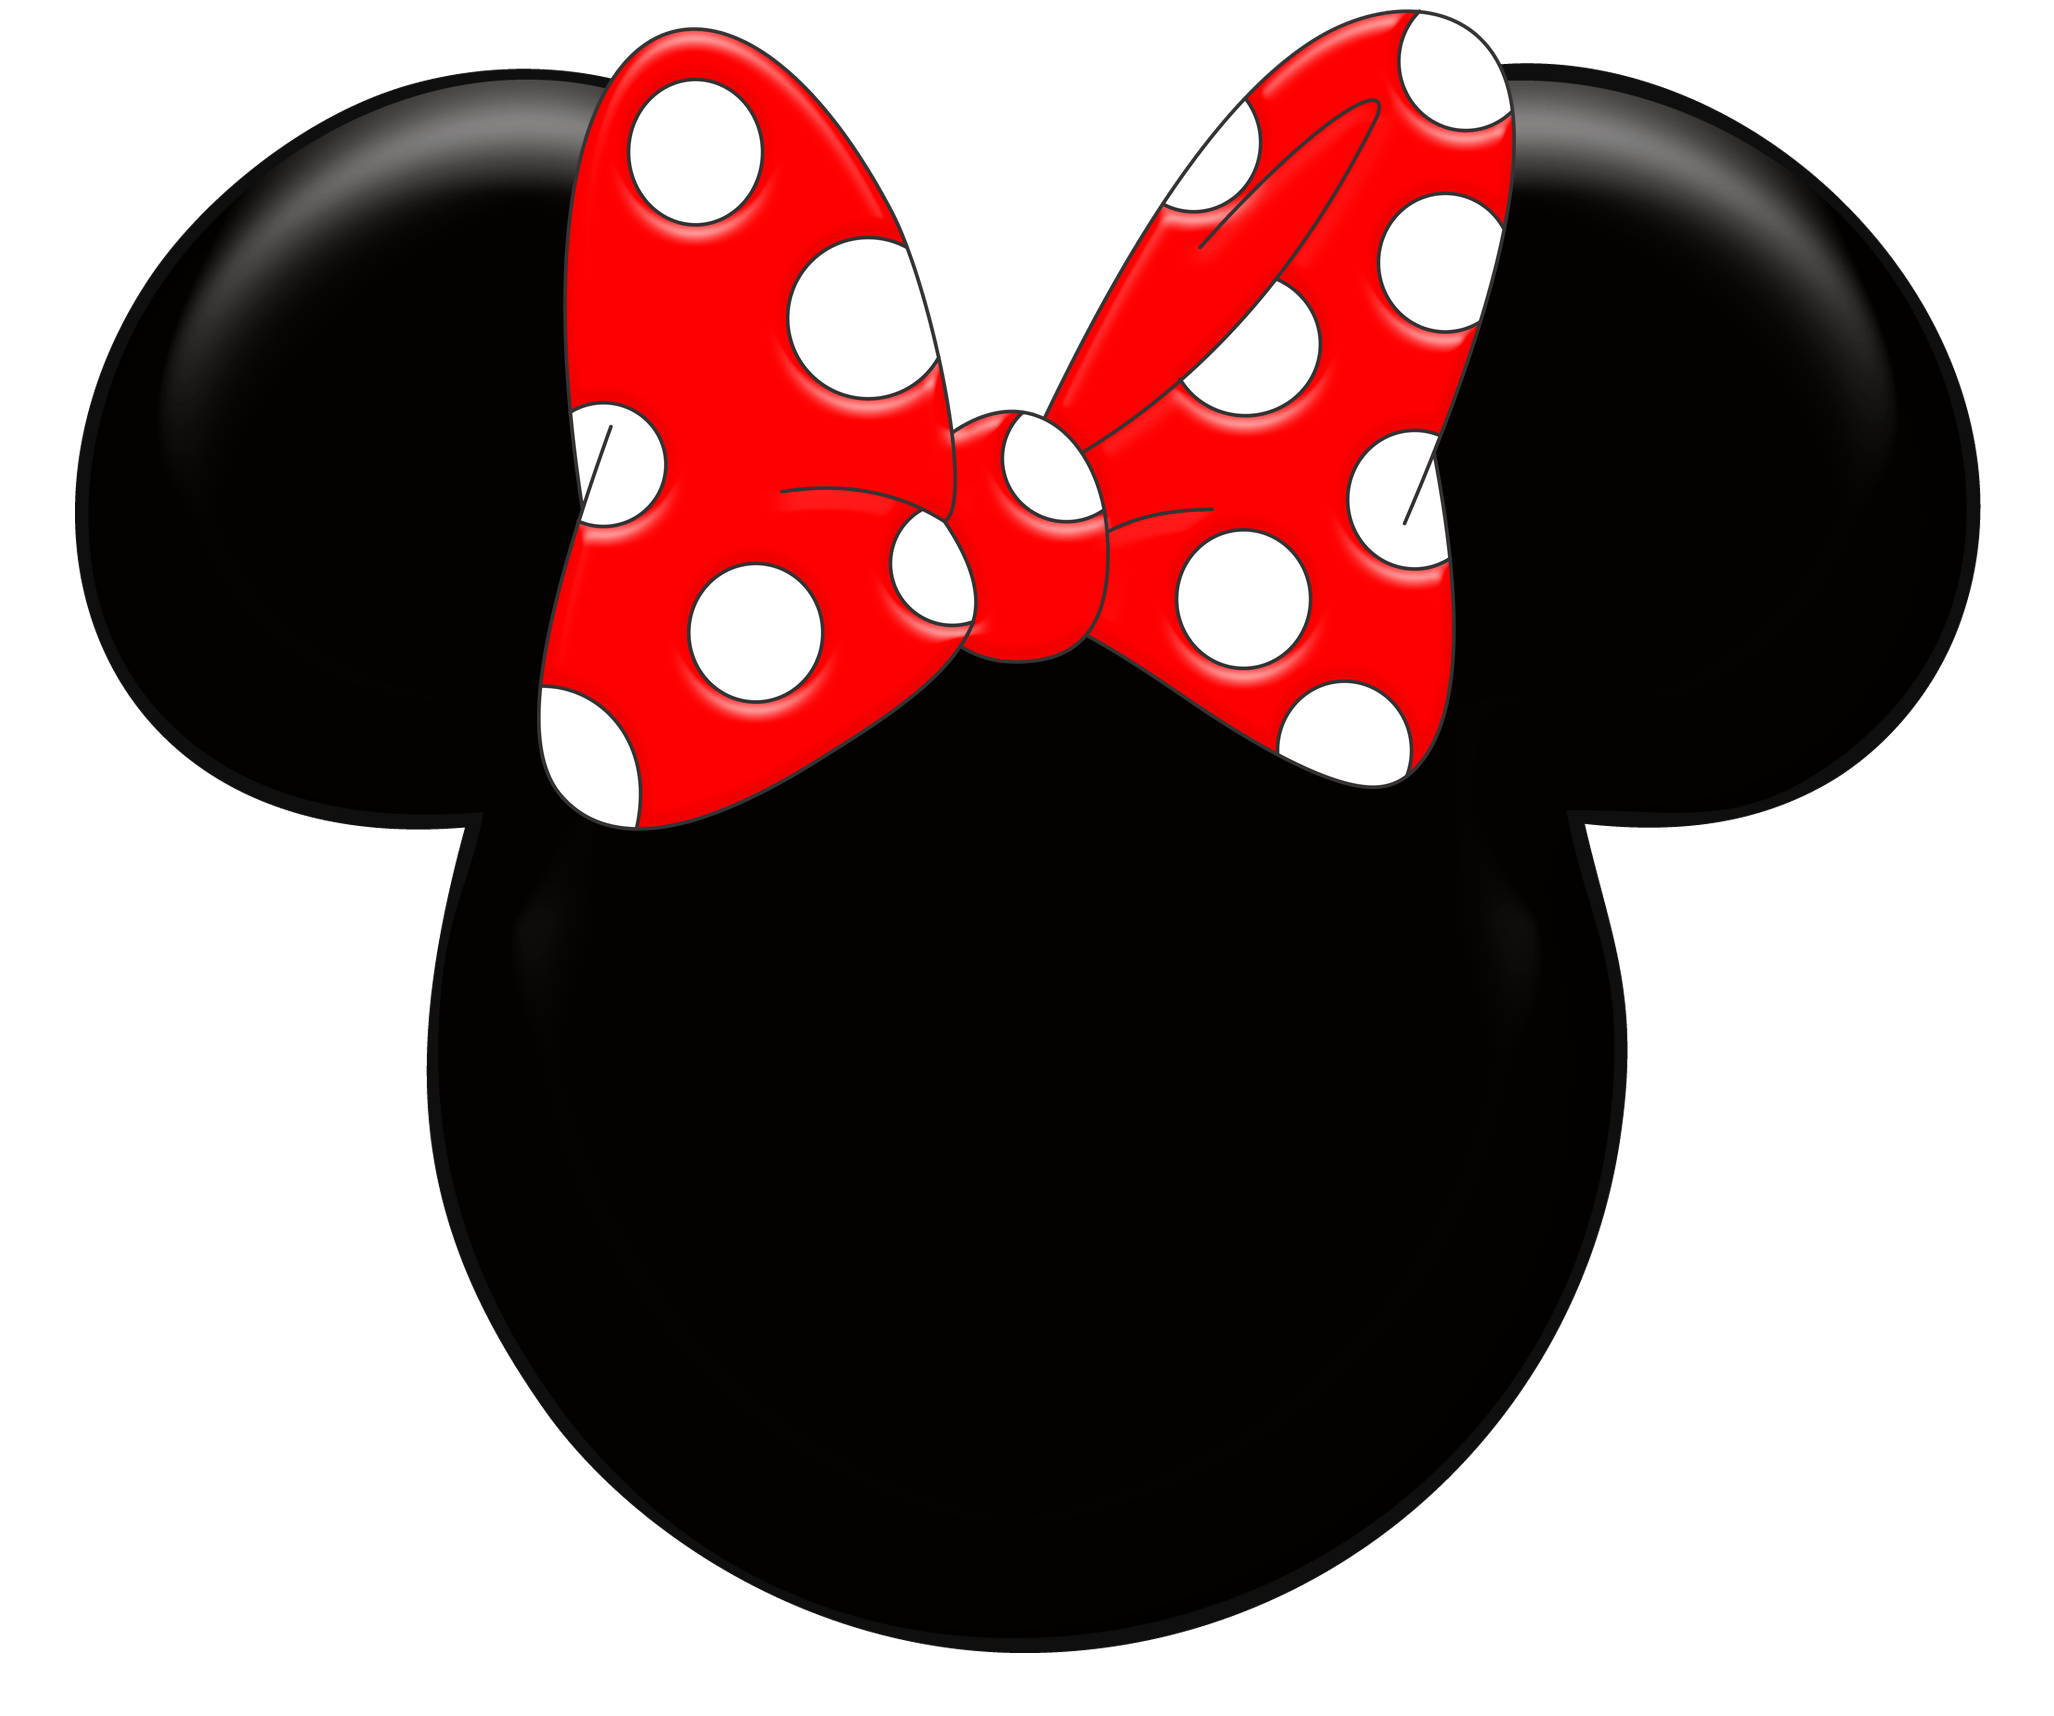 Minnie Logo - Minnie Mouse Logo | Free download best Minnie Mouse Logo on ...